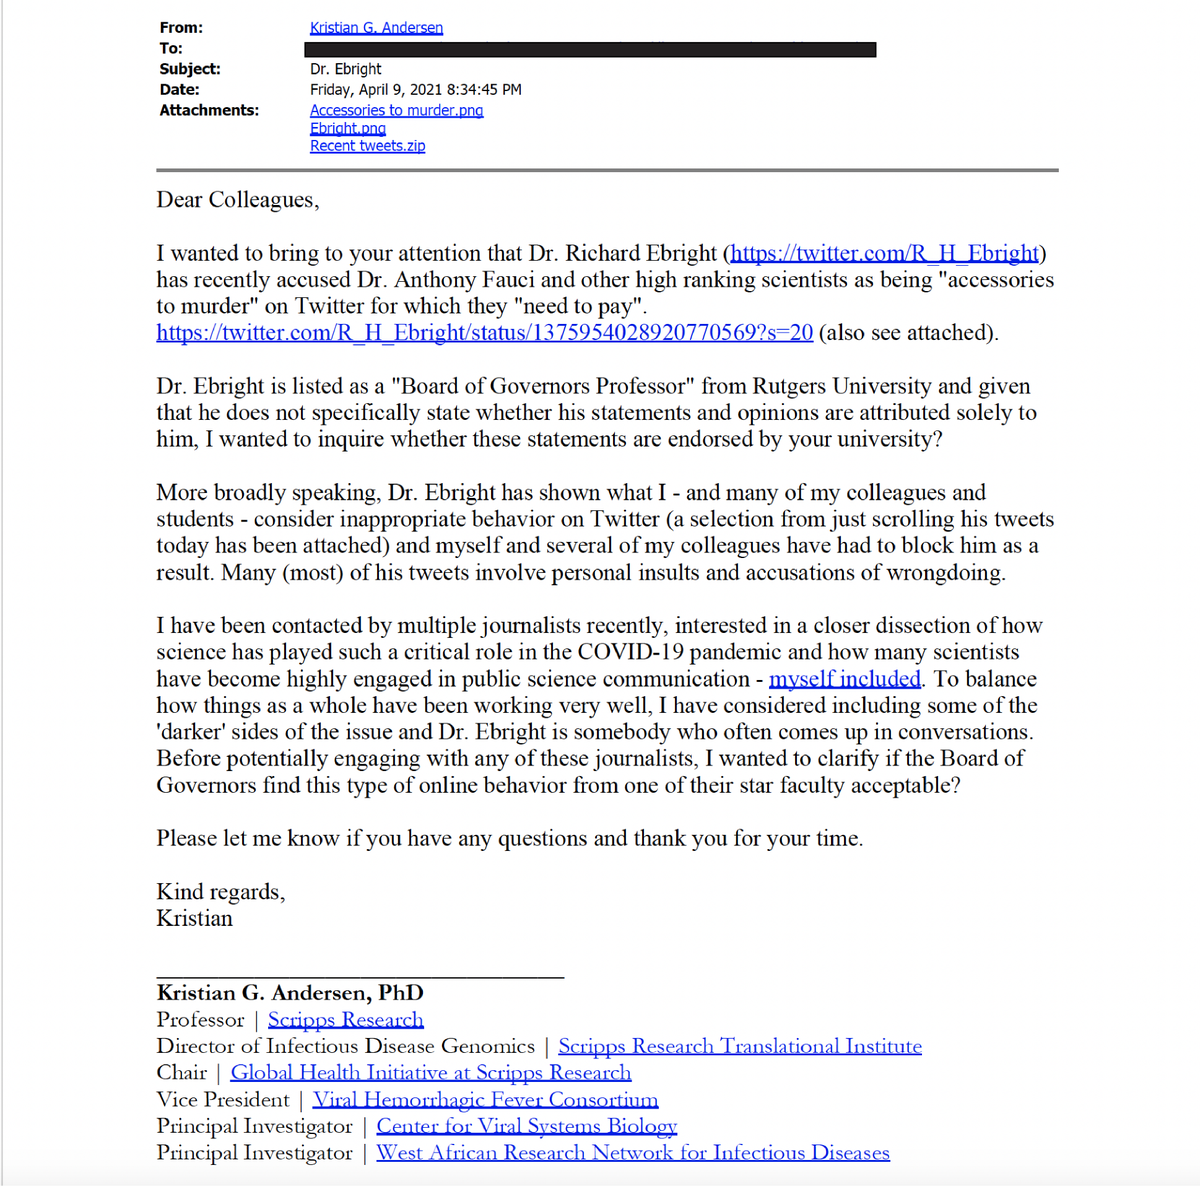 How to silence This email, sent to Rutgers' administrators by Kristian Andersen on April 9, 2021, was obtained through an open records request. I became aware of this email from a subsequent message sent by Andersen & 11 others on March 24, 2024 (see post 3 in thread). (1/n)